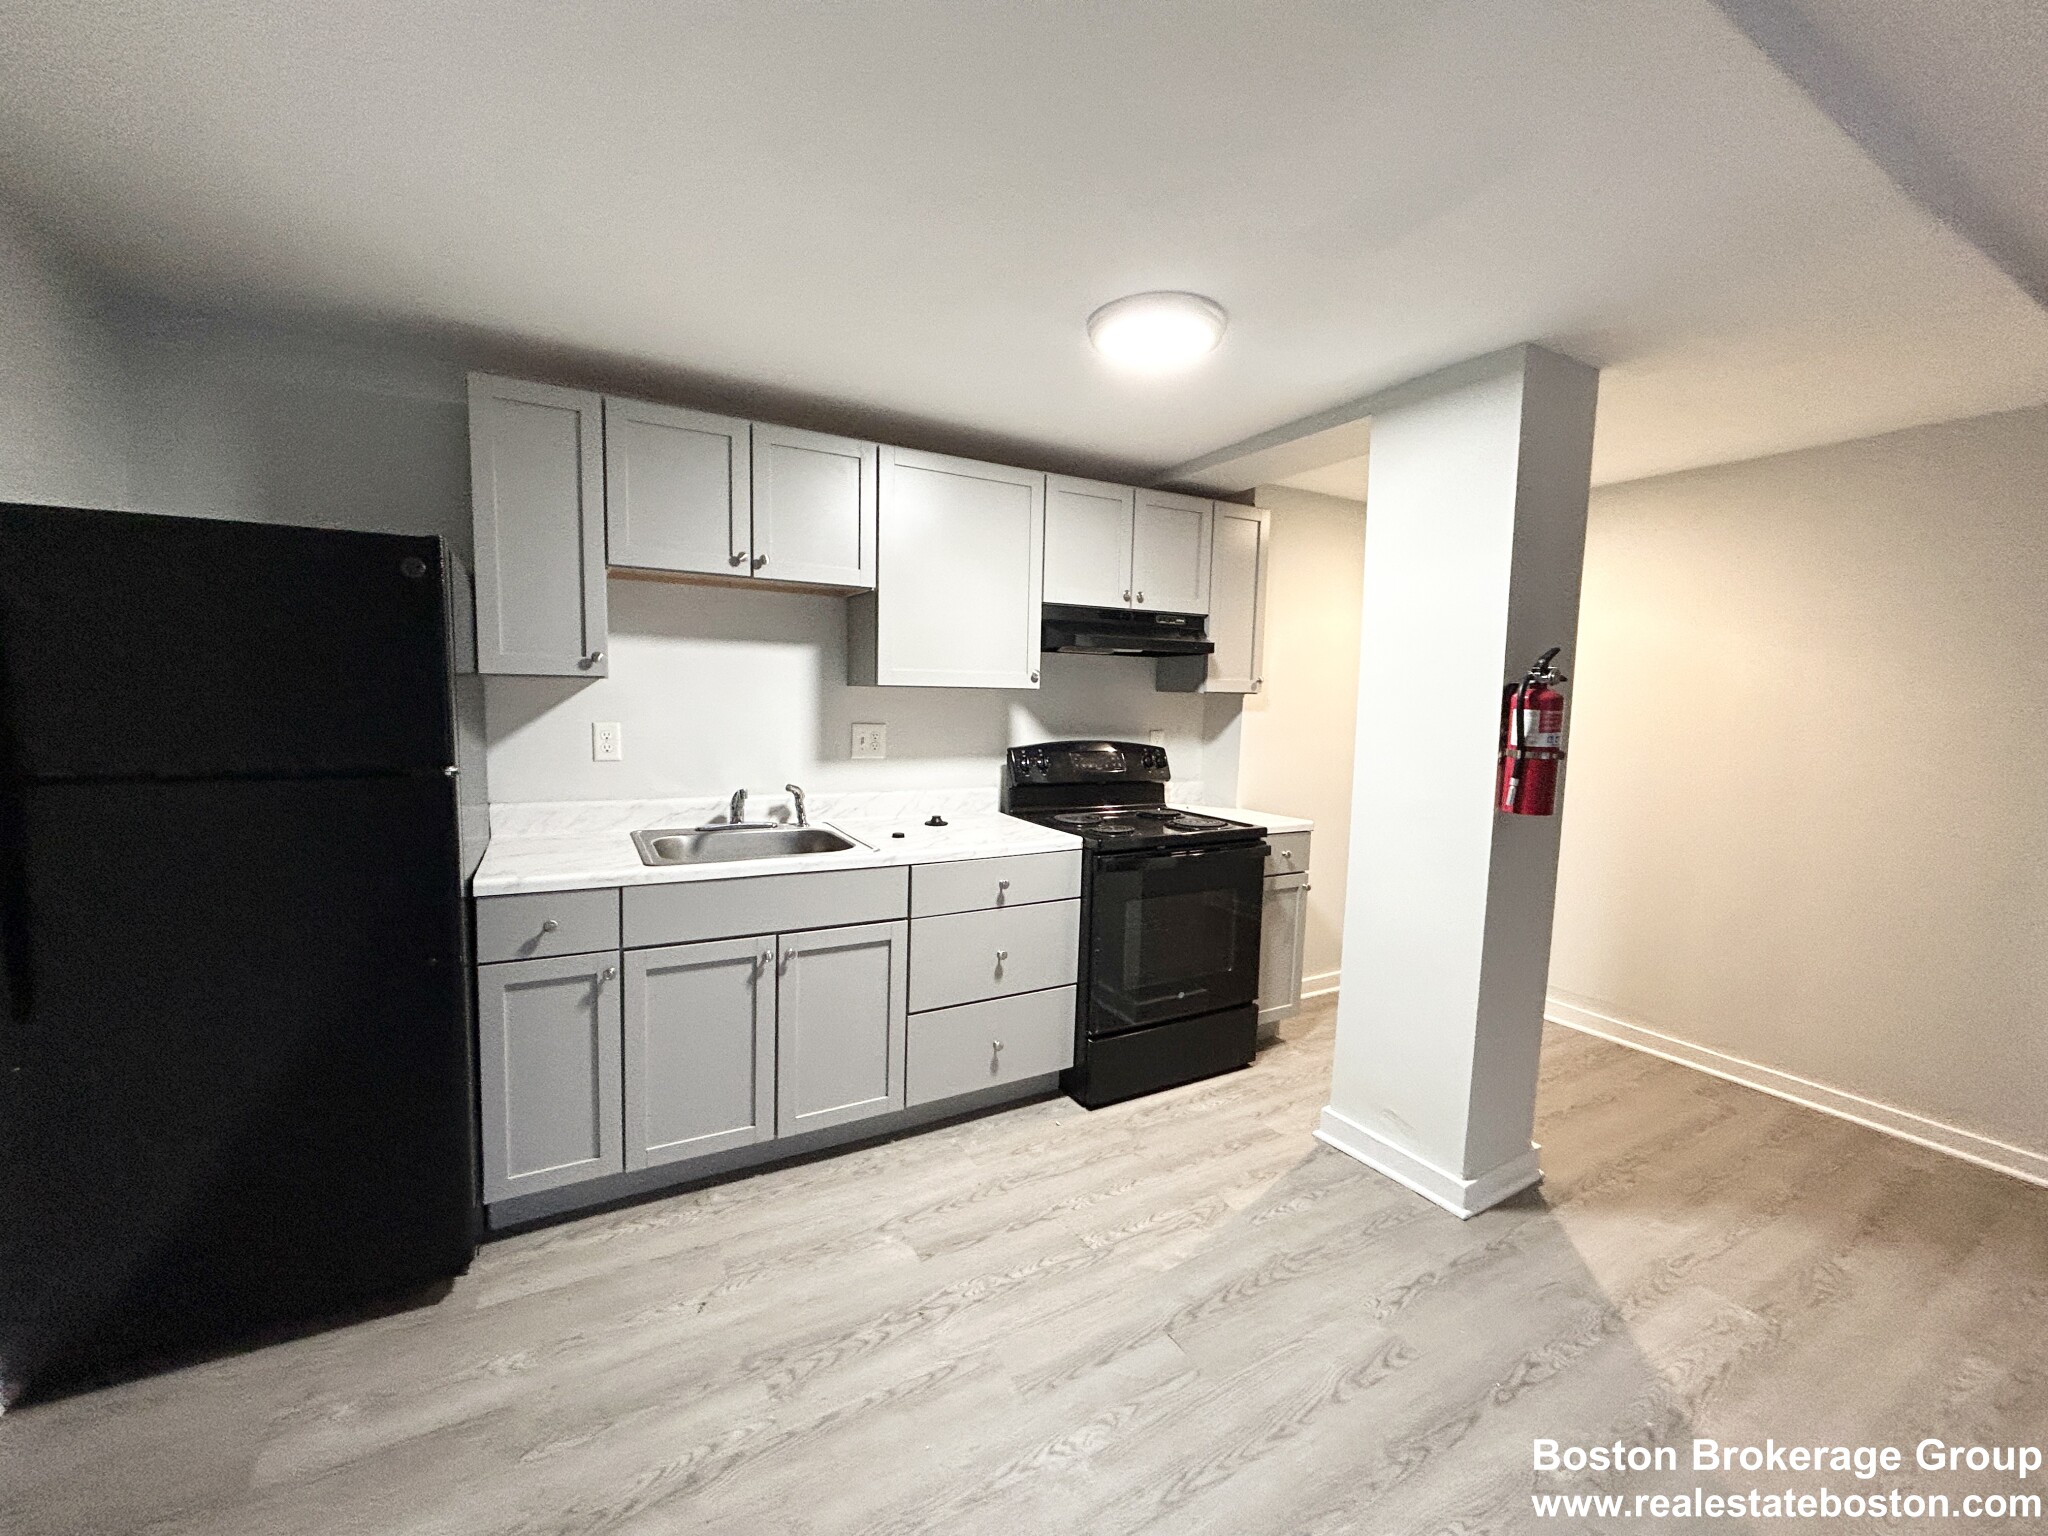 Photos of apartment on Ruggles St.,Boston MA 02119